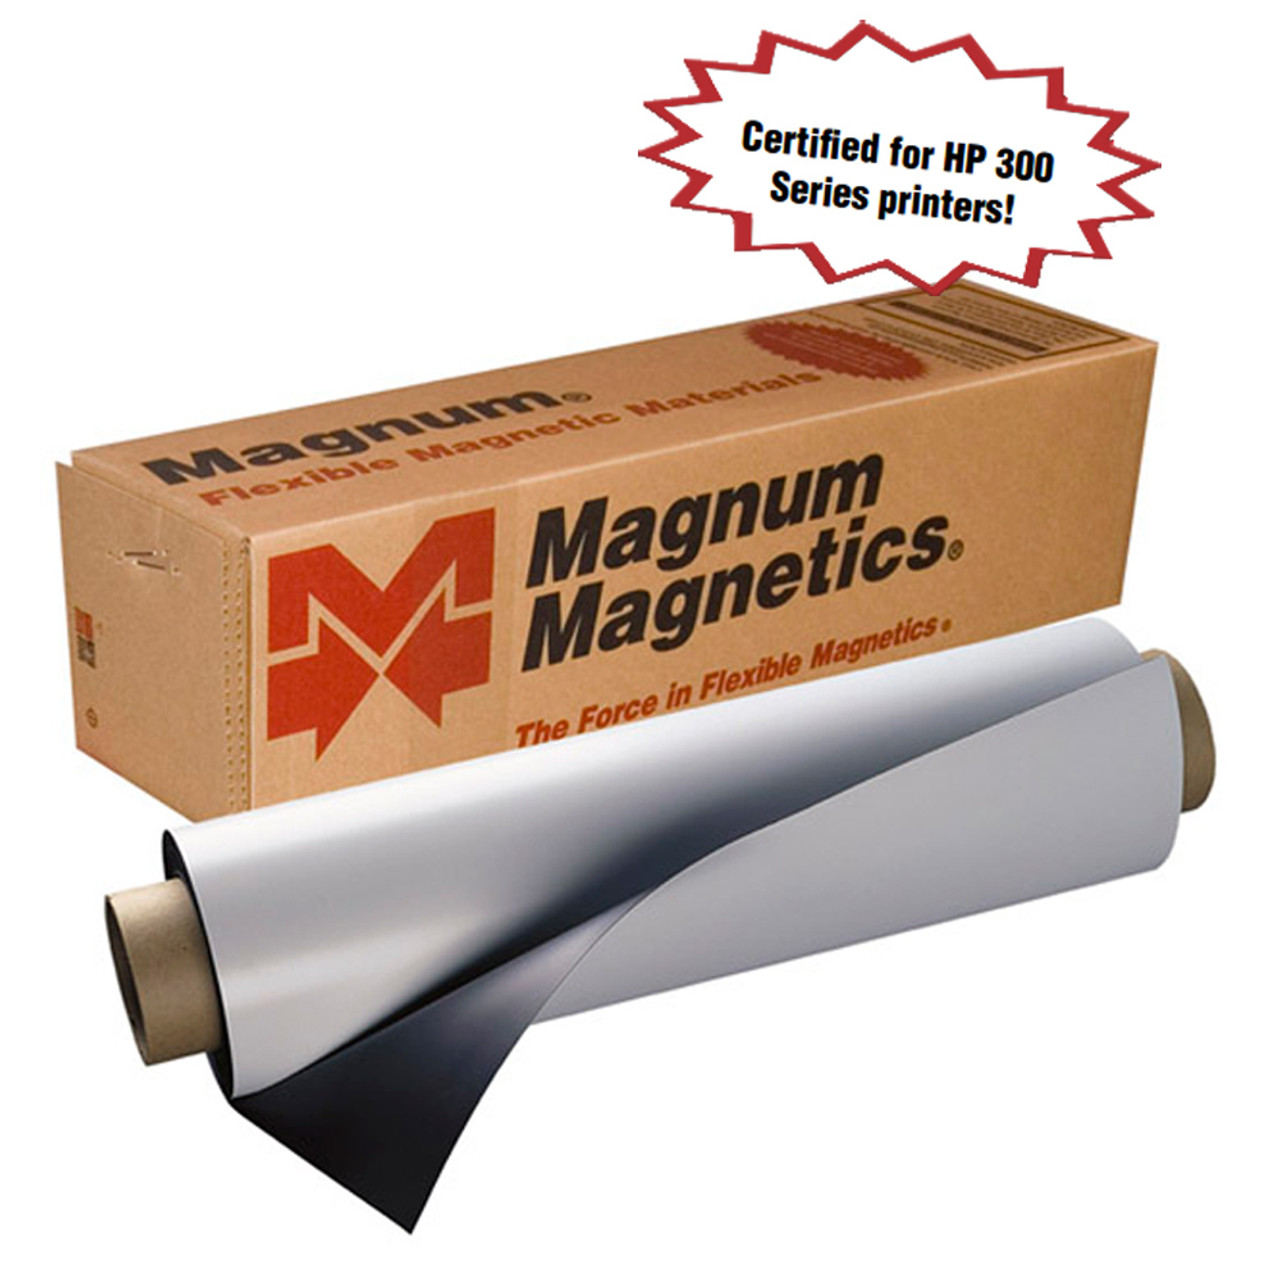 https://cdn11.bigcommerce.com/s-stdtga21hq/images/stencil/1280x1280/products/839/1858/Magnum-Magnetics-MusleMag-Latex-Printable-Magnet__16938.1675215206.jpg?c=1